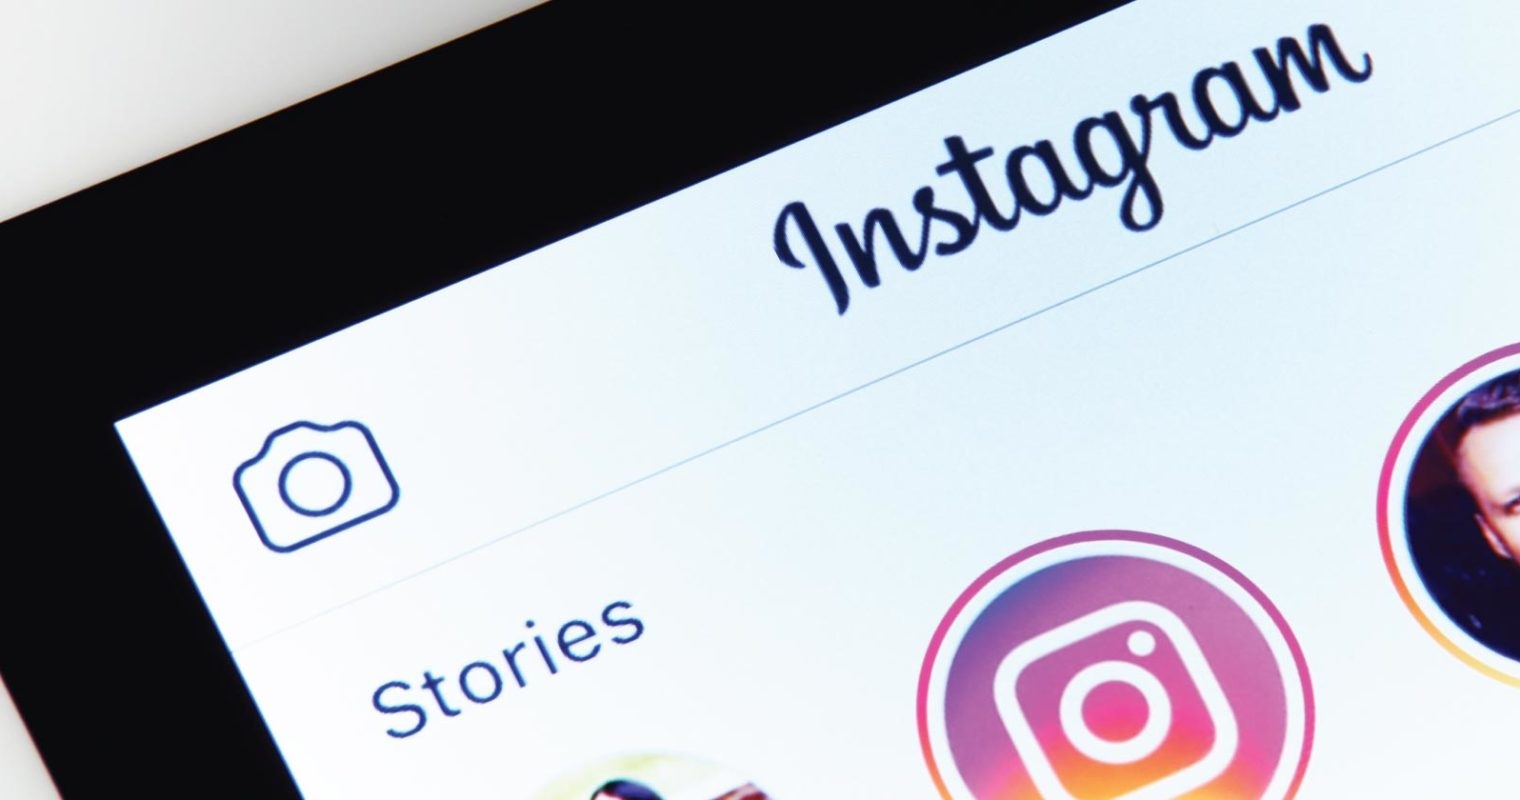 Shadowban On Instagram: What Is It And How To Avoid It?